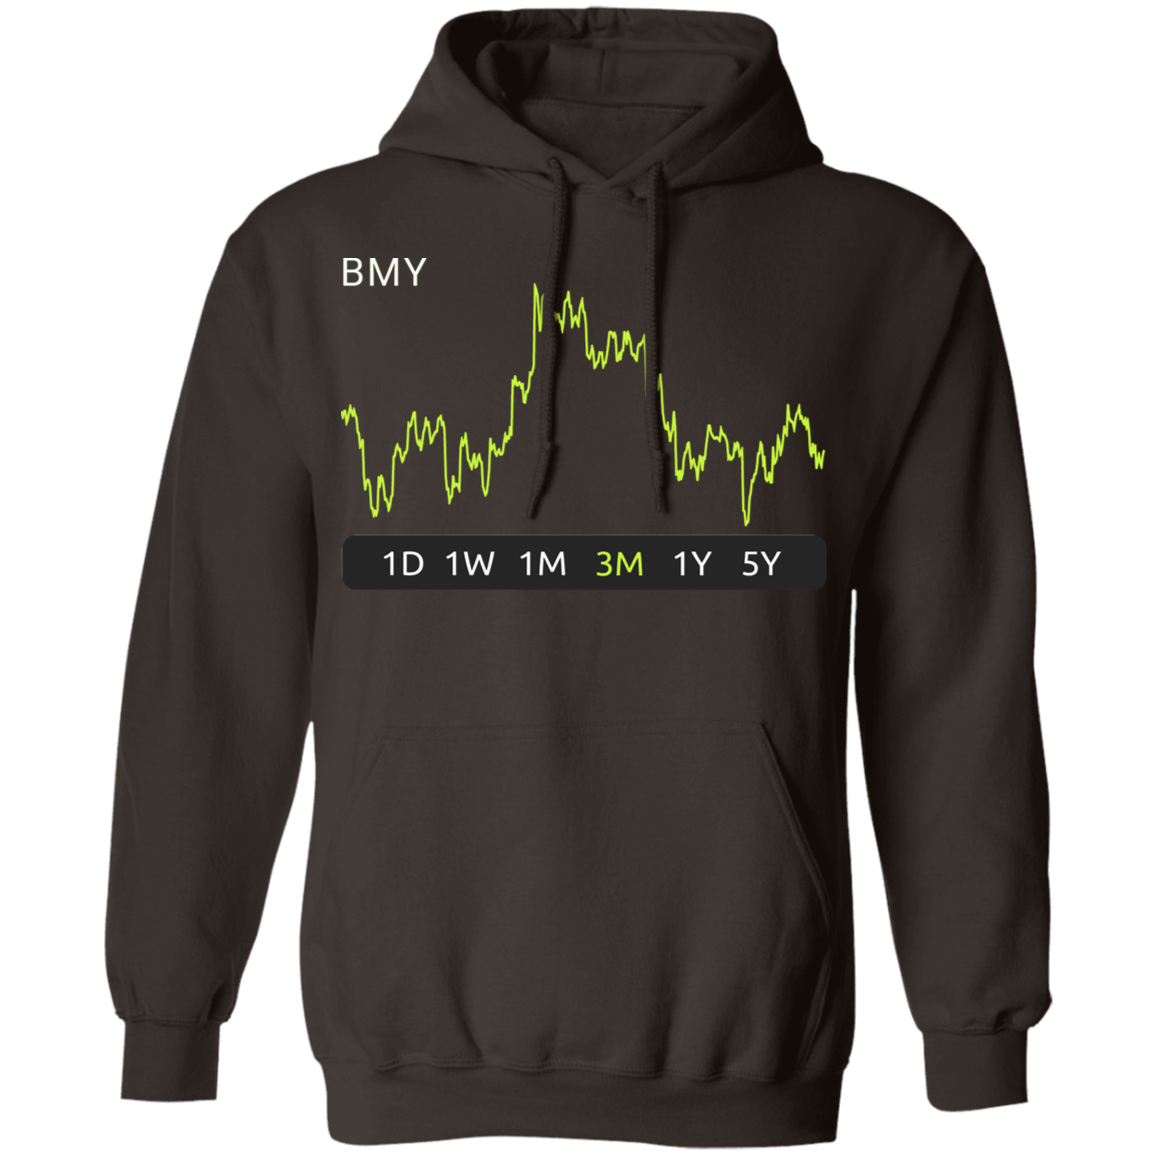 BMY Stock 3m Pullover Hoodie